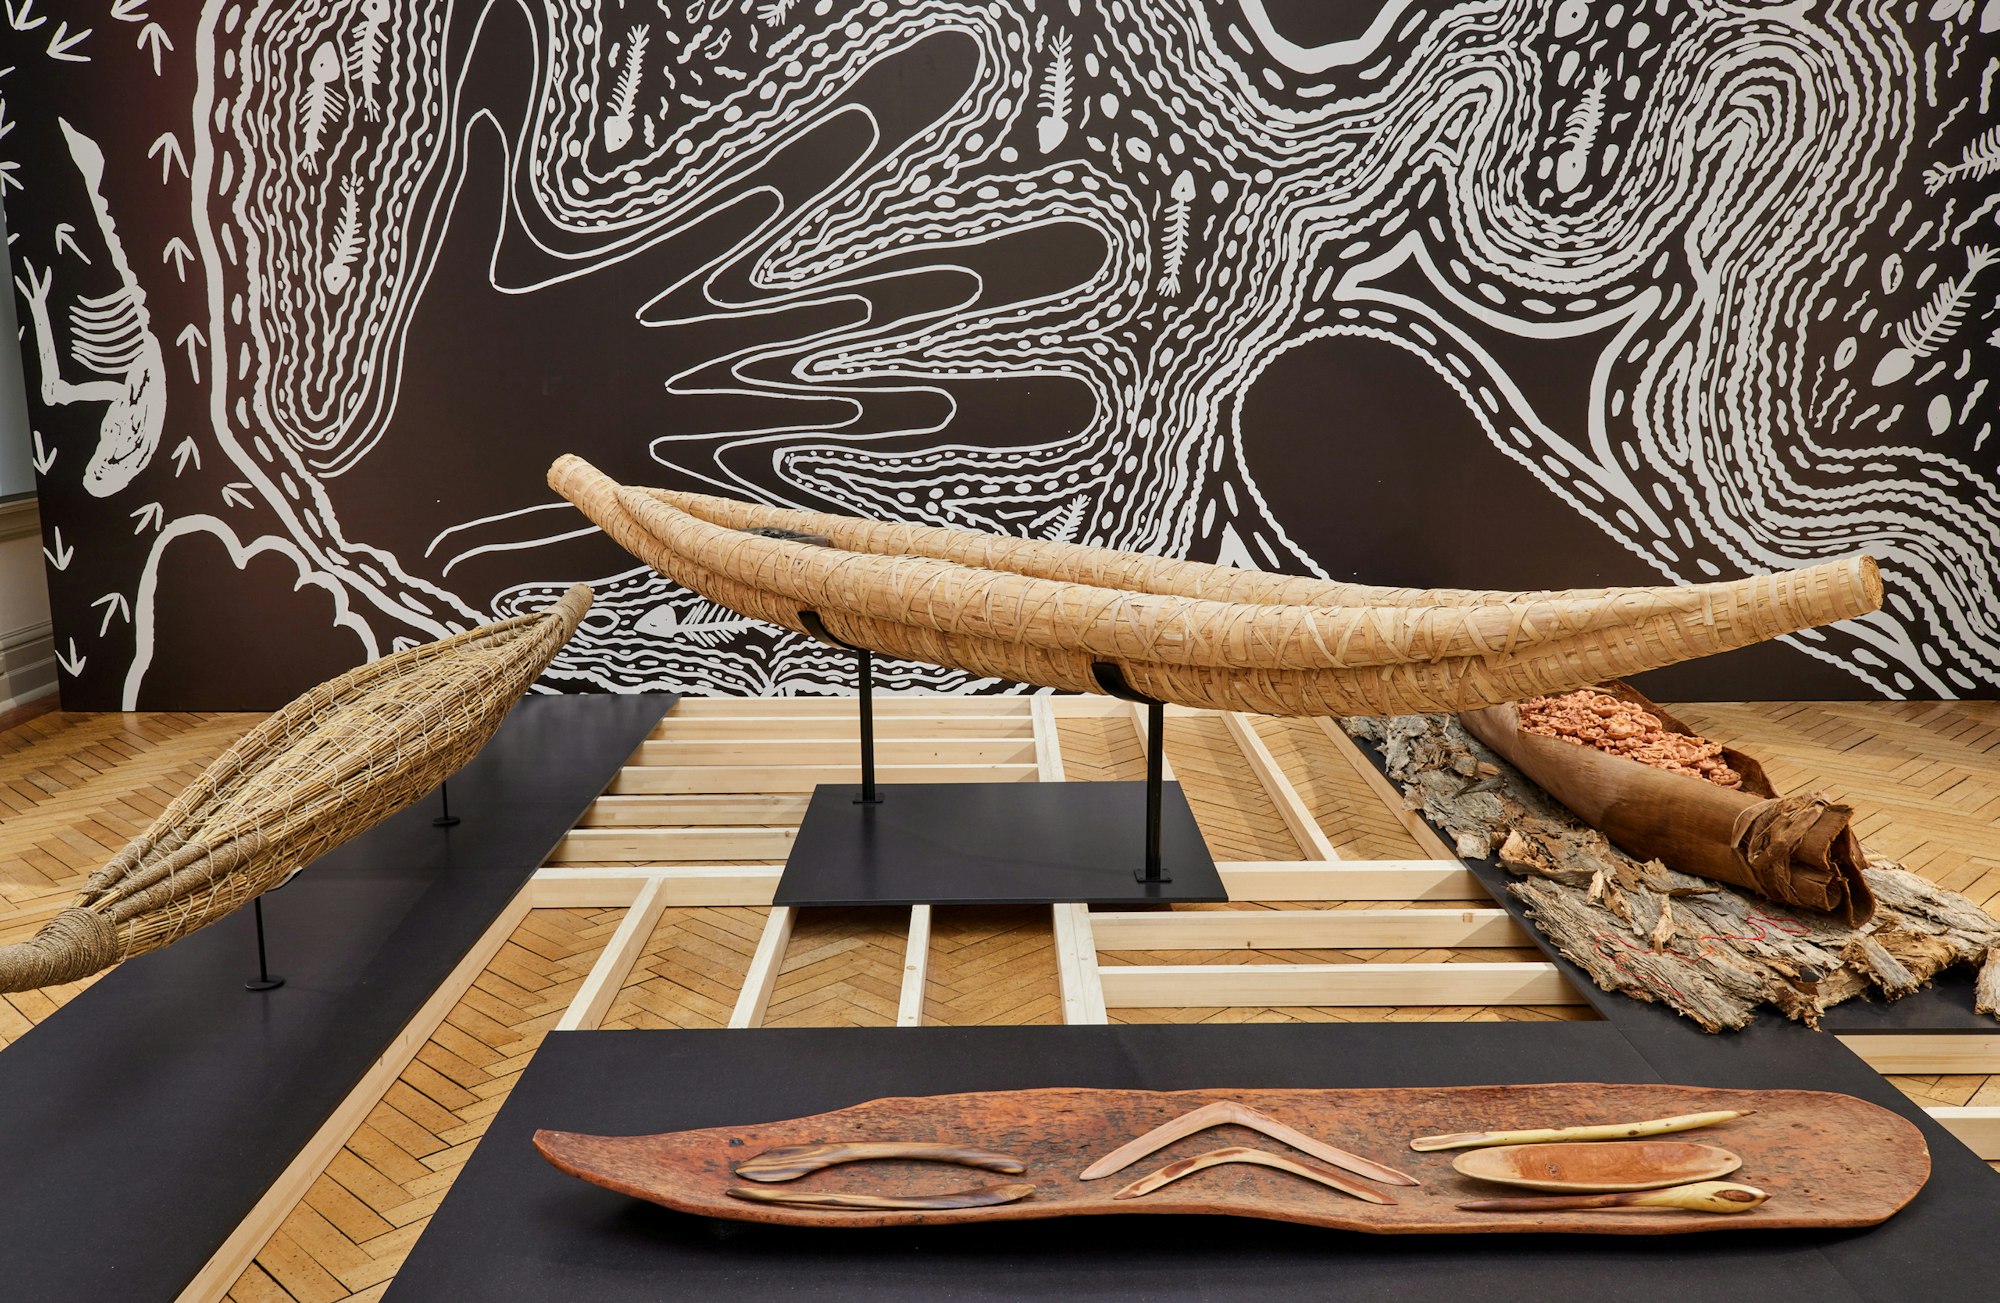 Bark canoes, boomerangs and other wooden objects in front of a black-and-white artwork featuring large hands.